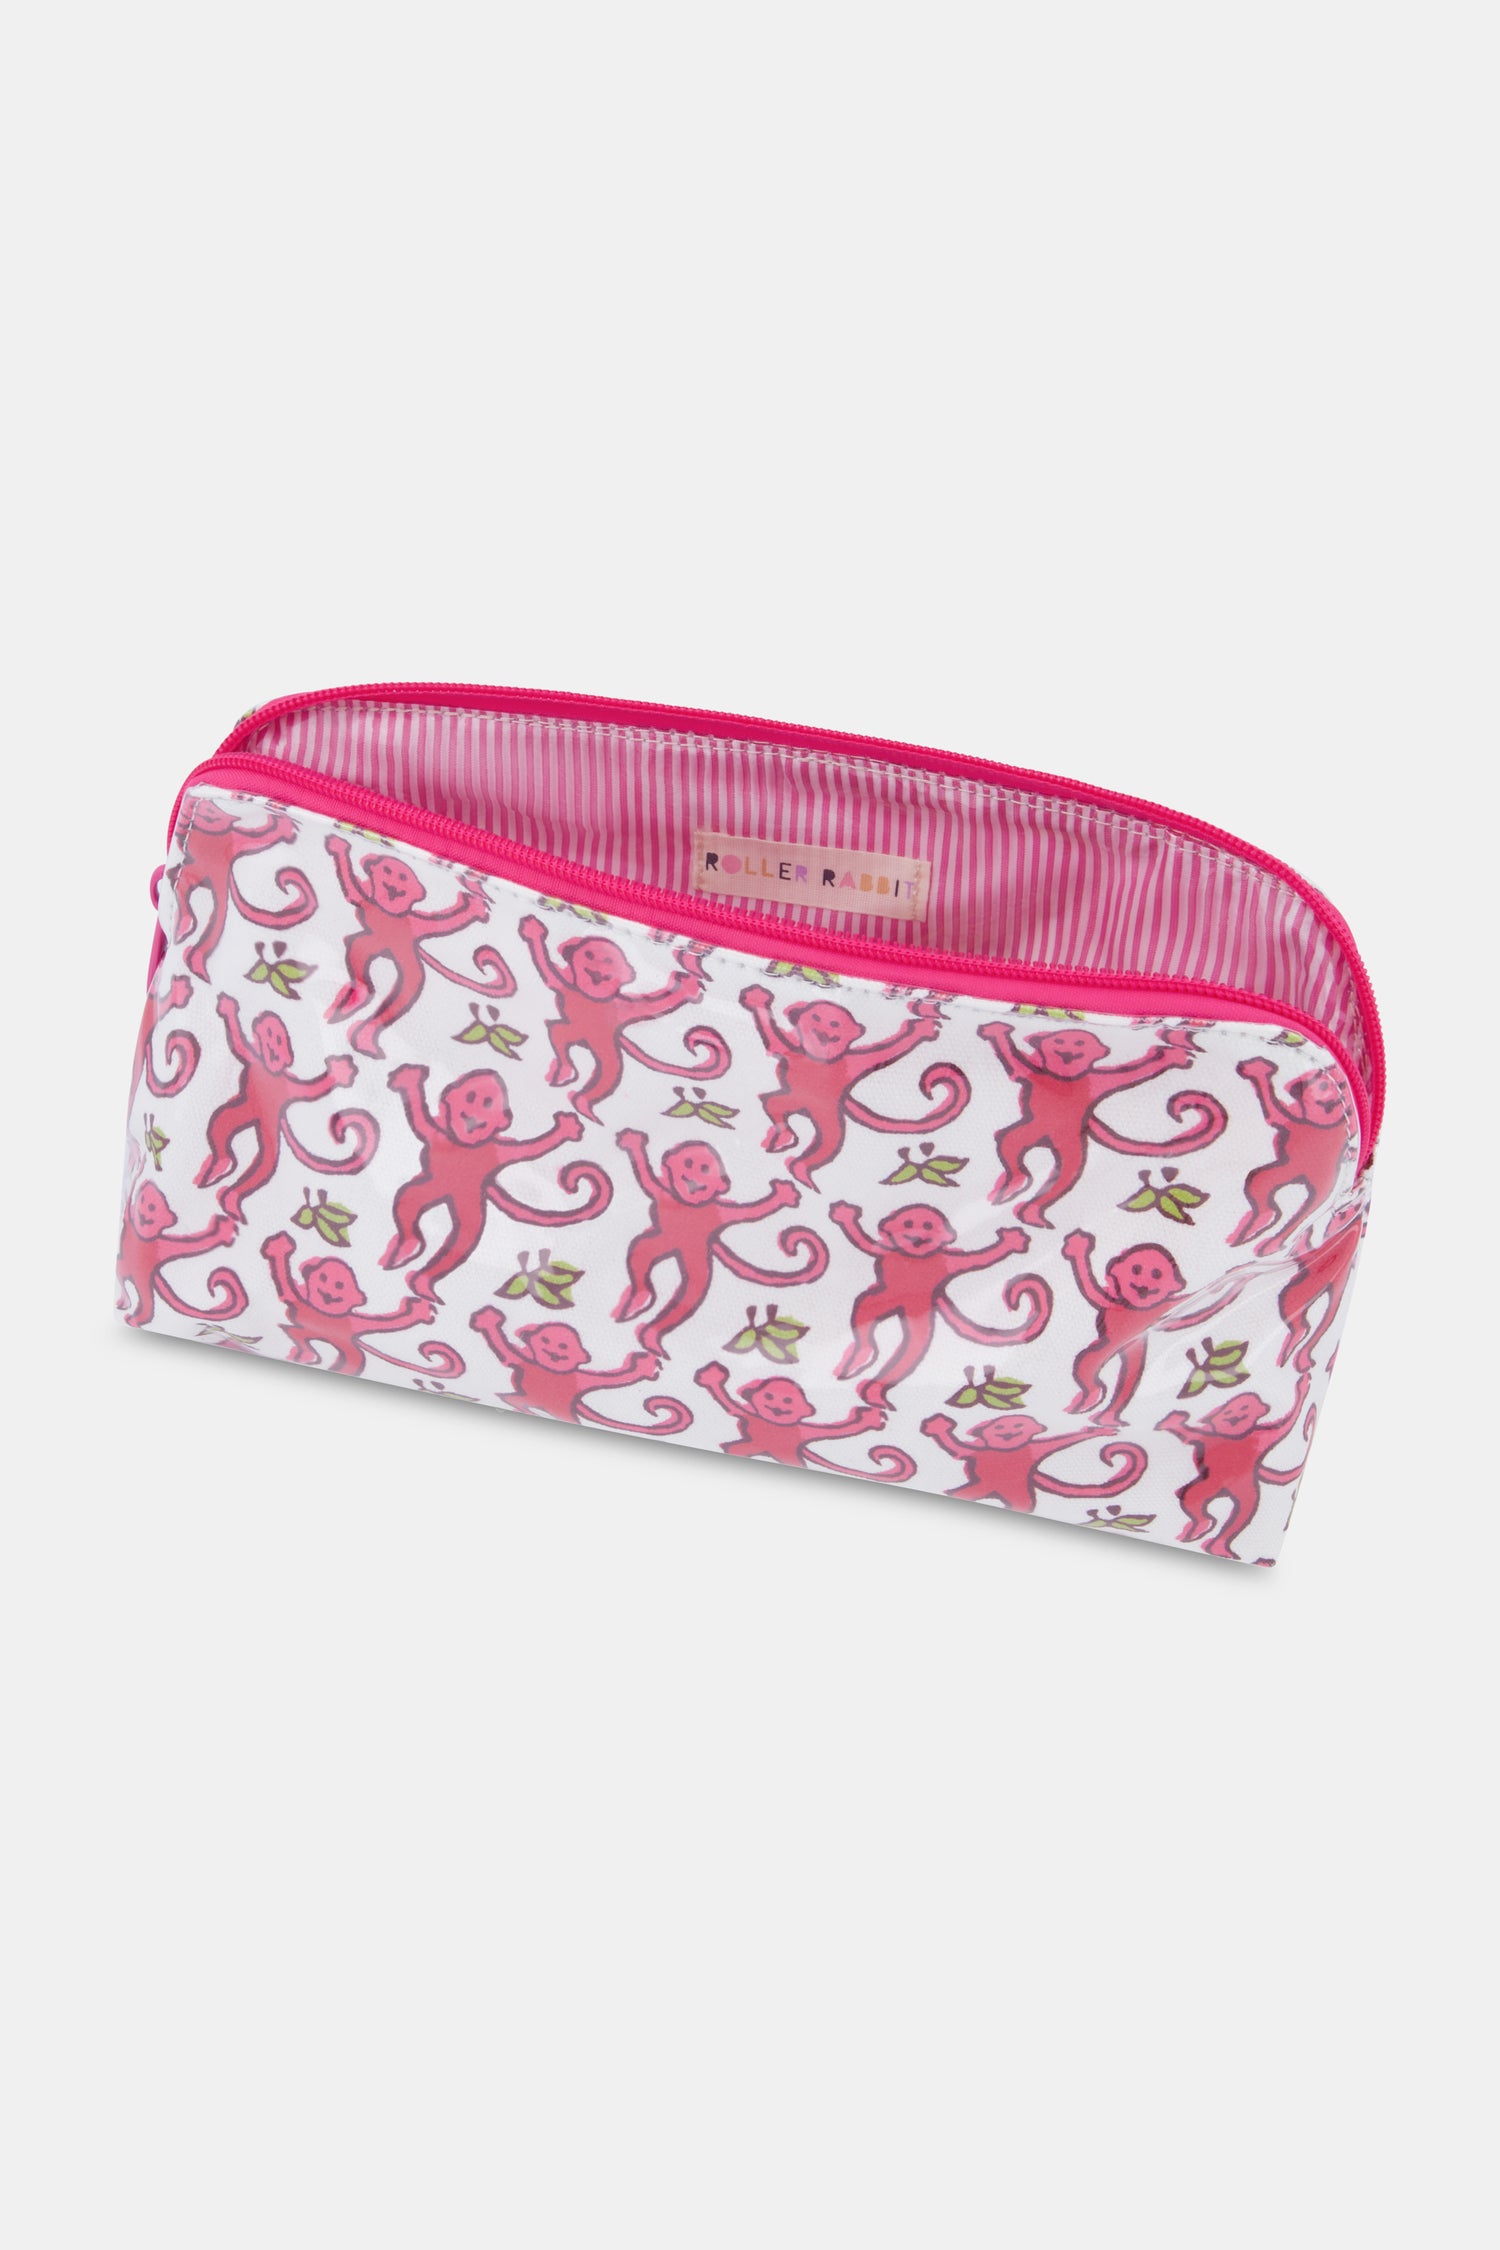 Makeup Bag can hold a lot if needed!! fit all of this and 3 bdc in there  (across the top) and it still zipped fully :) durable, cute, and spacey  🫶🏼 : r/glossier